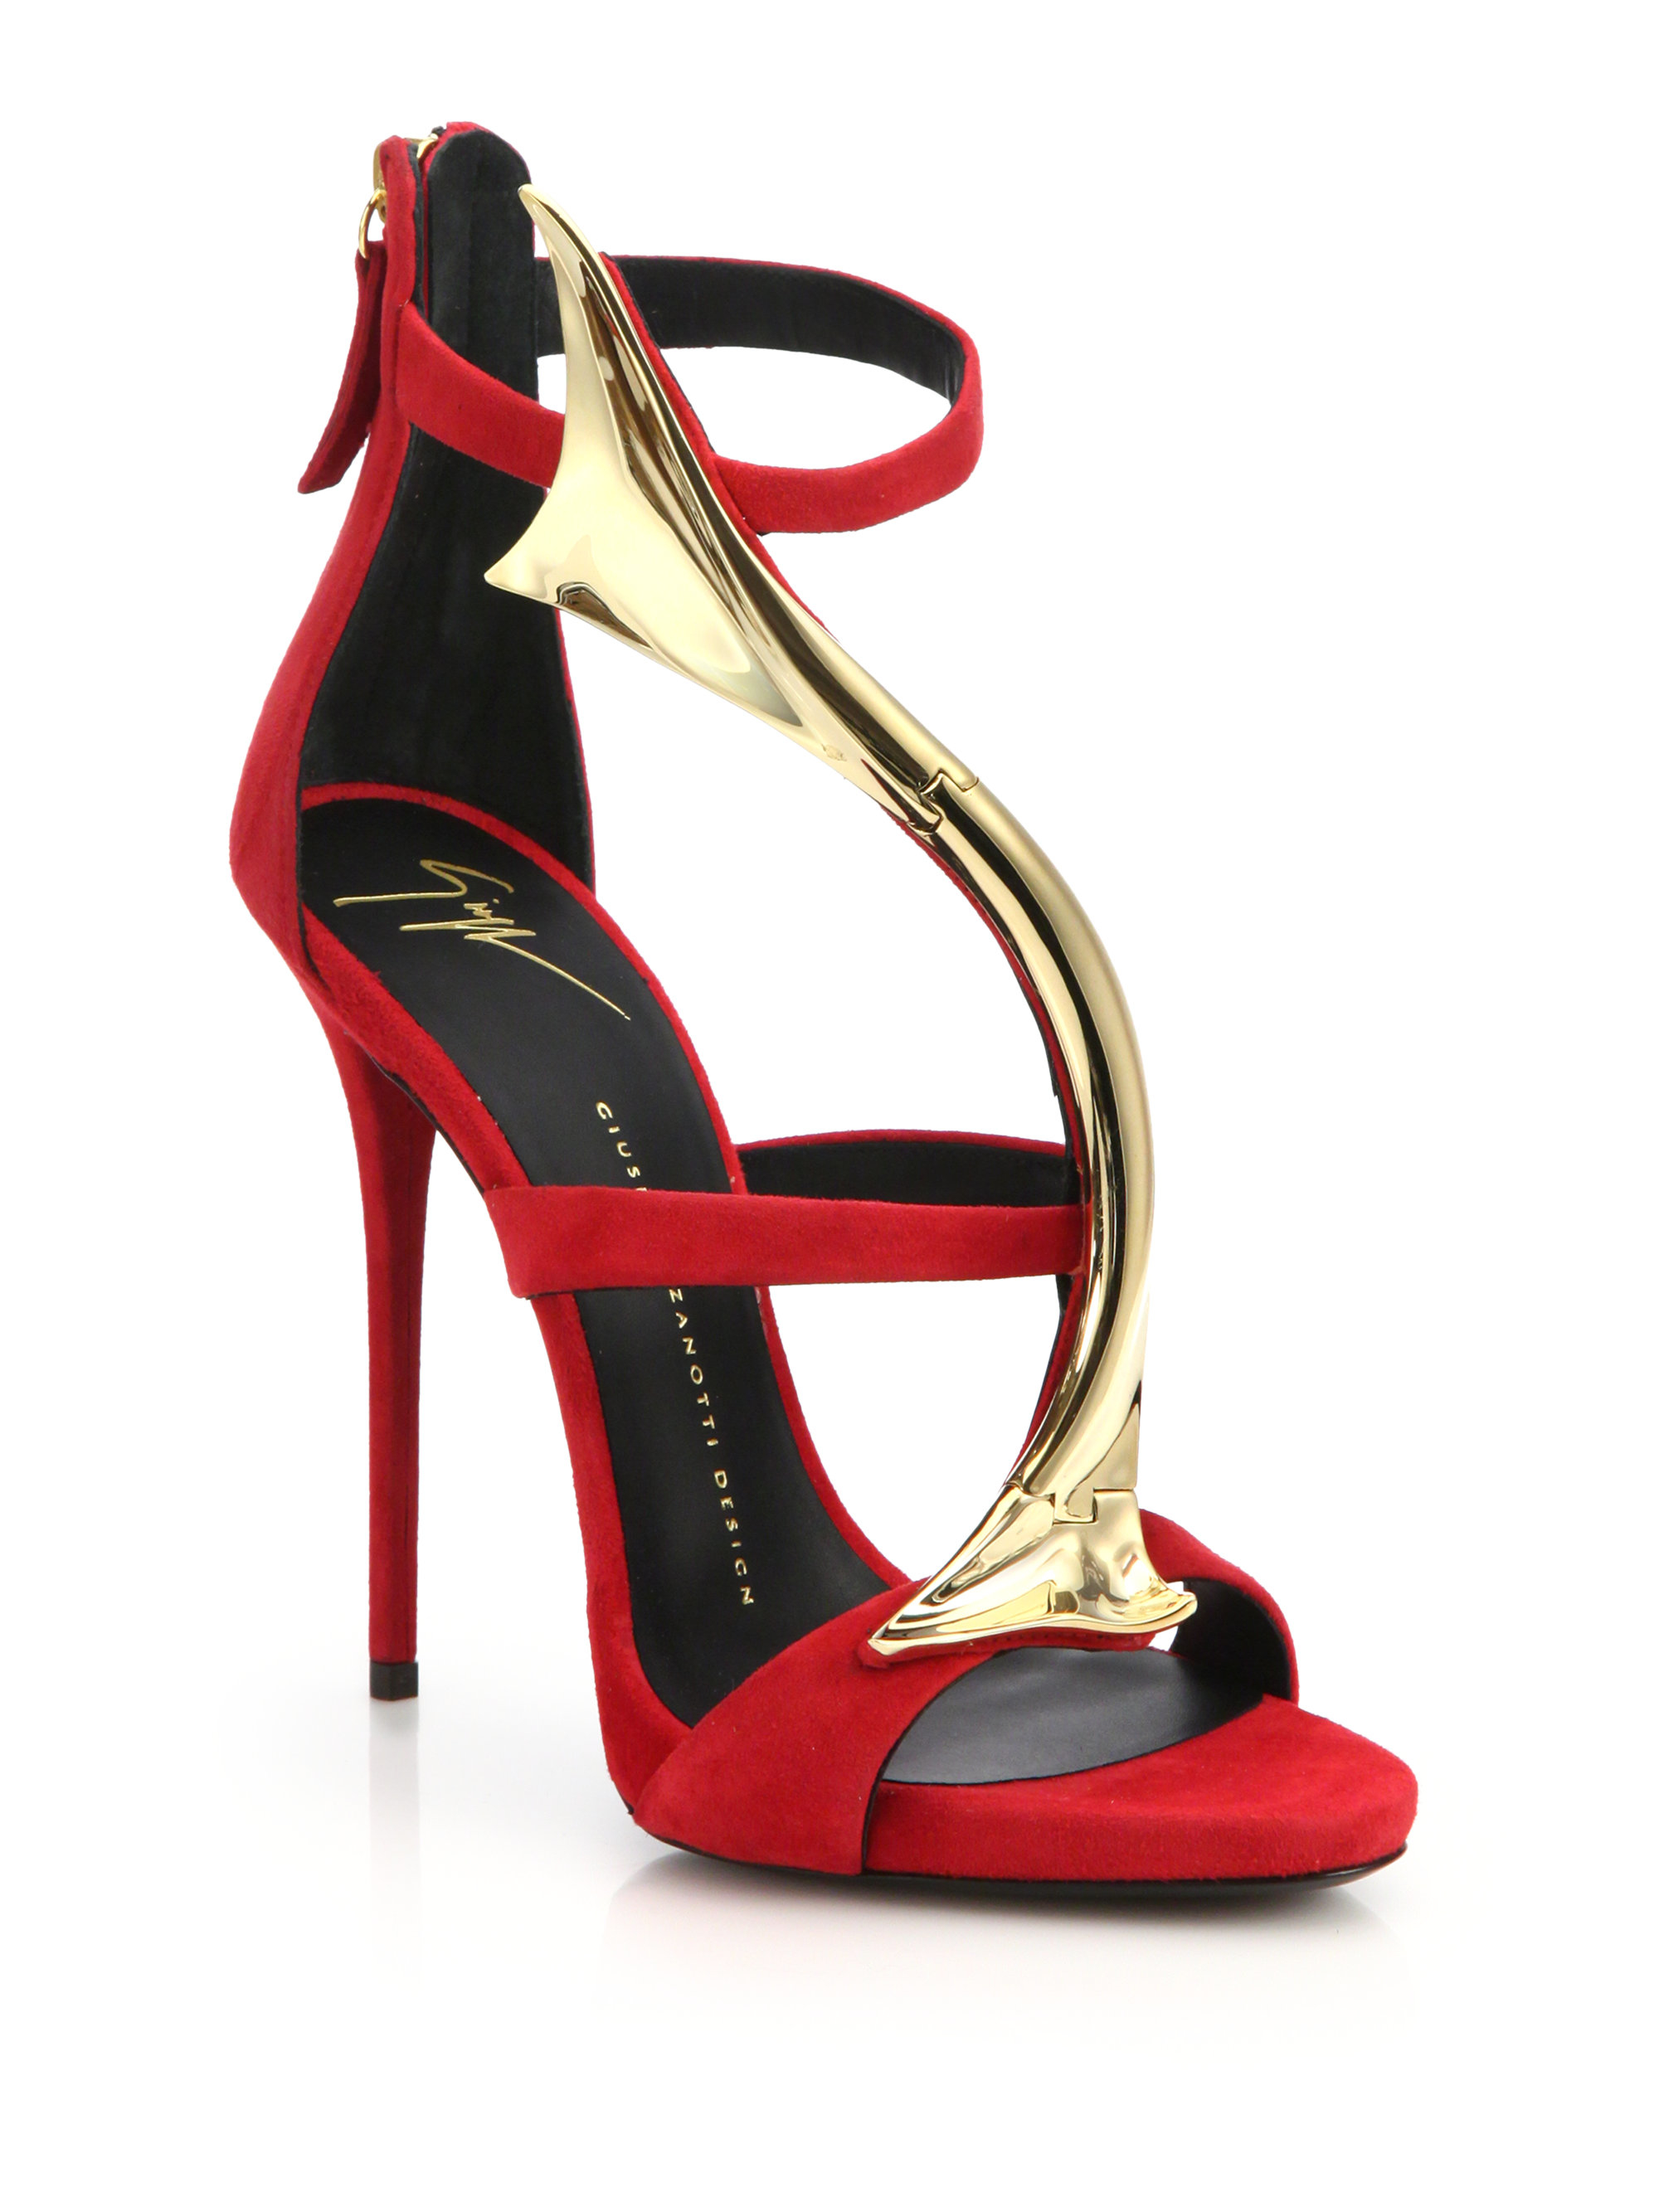 Lyst - Giuseppe Zanotti Suede & Goldtone Overlay Sandals in Red